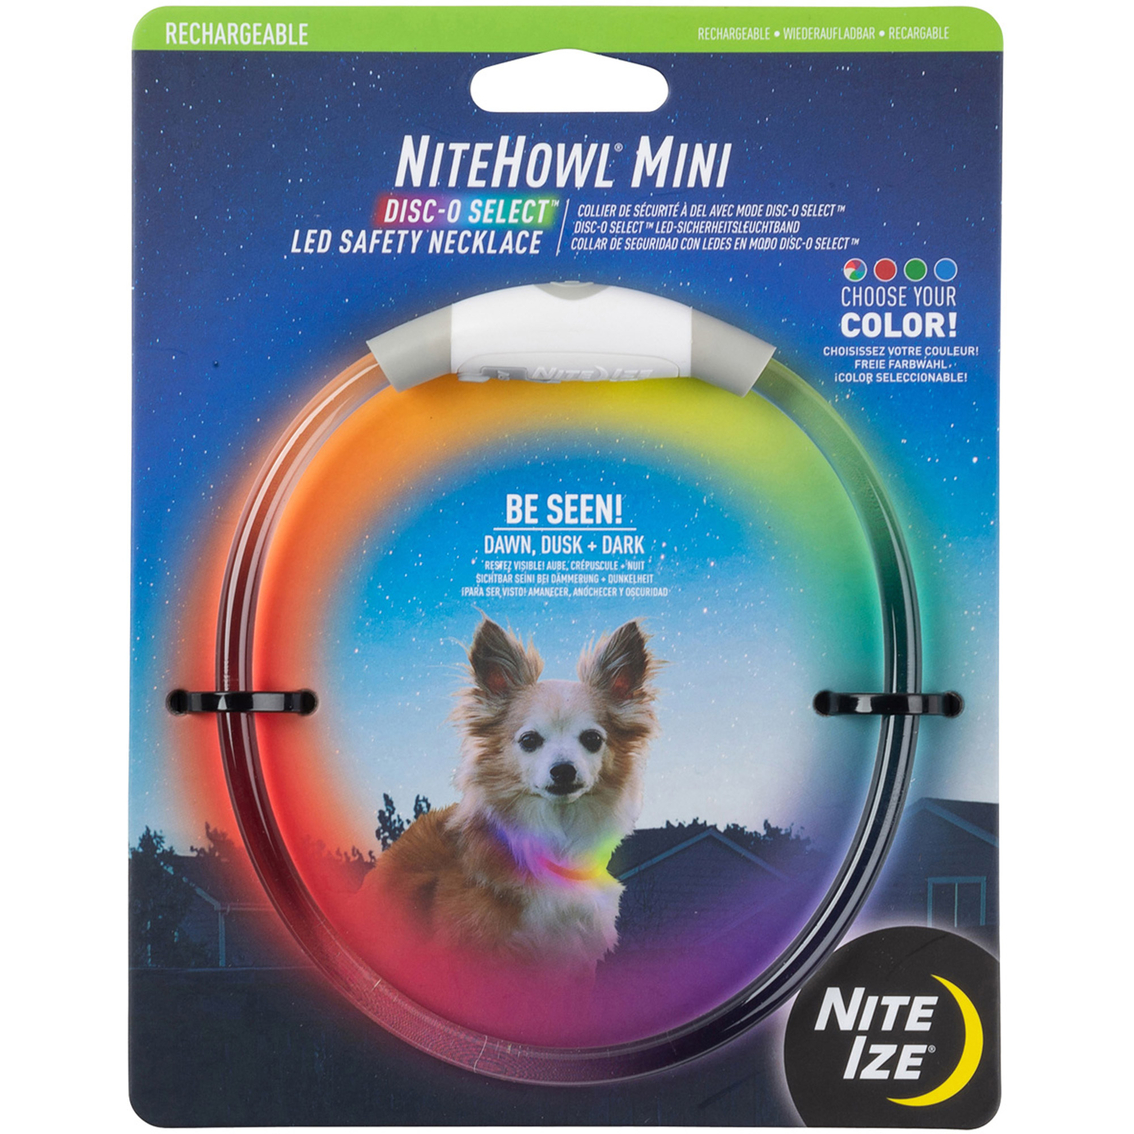 Nite Ize Nite Howl Mini Rechargeable LED Safety Necklace with Disc O Select